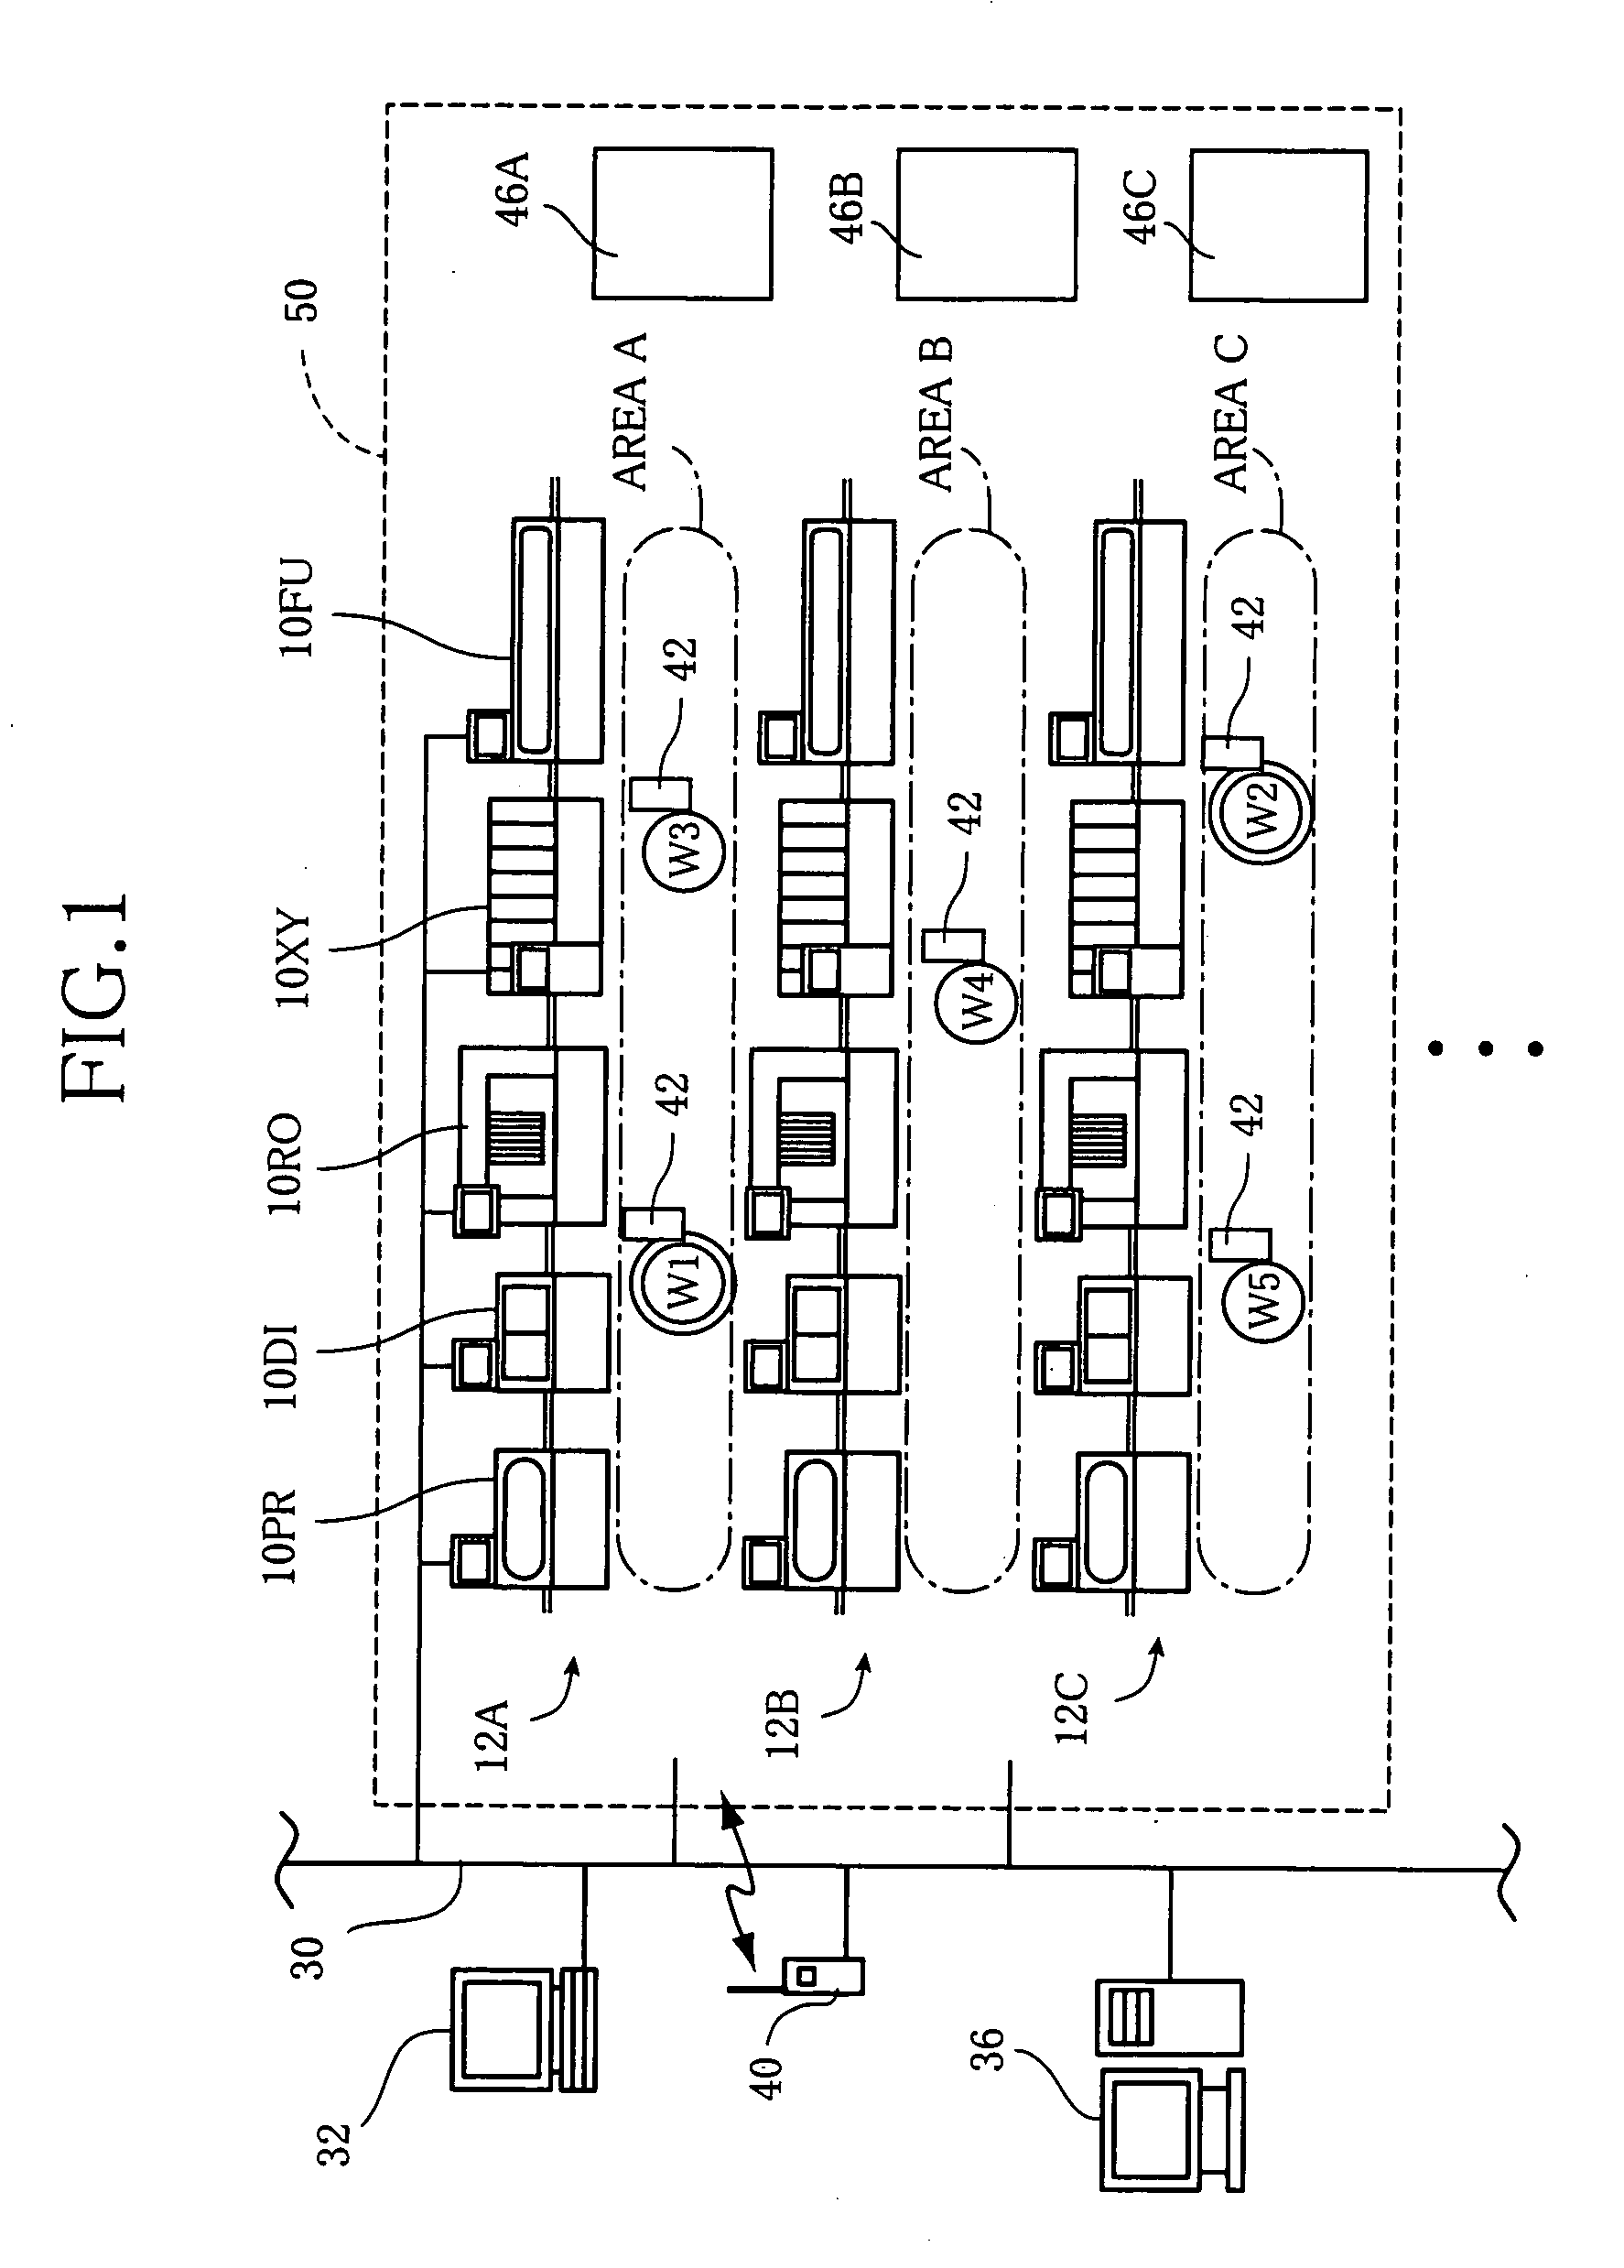 Assisting work management apparatus for substrate work system and assisting work management program for substrate work system